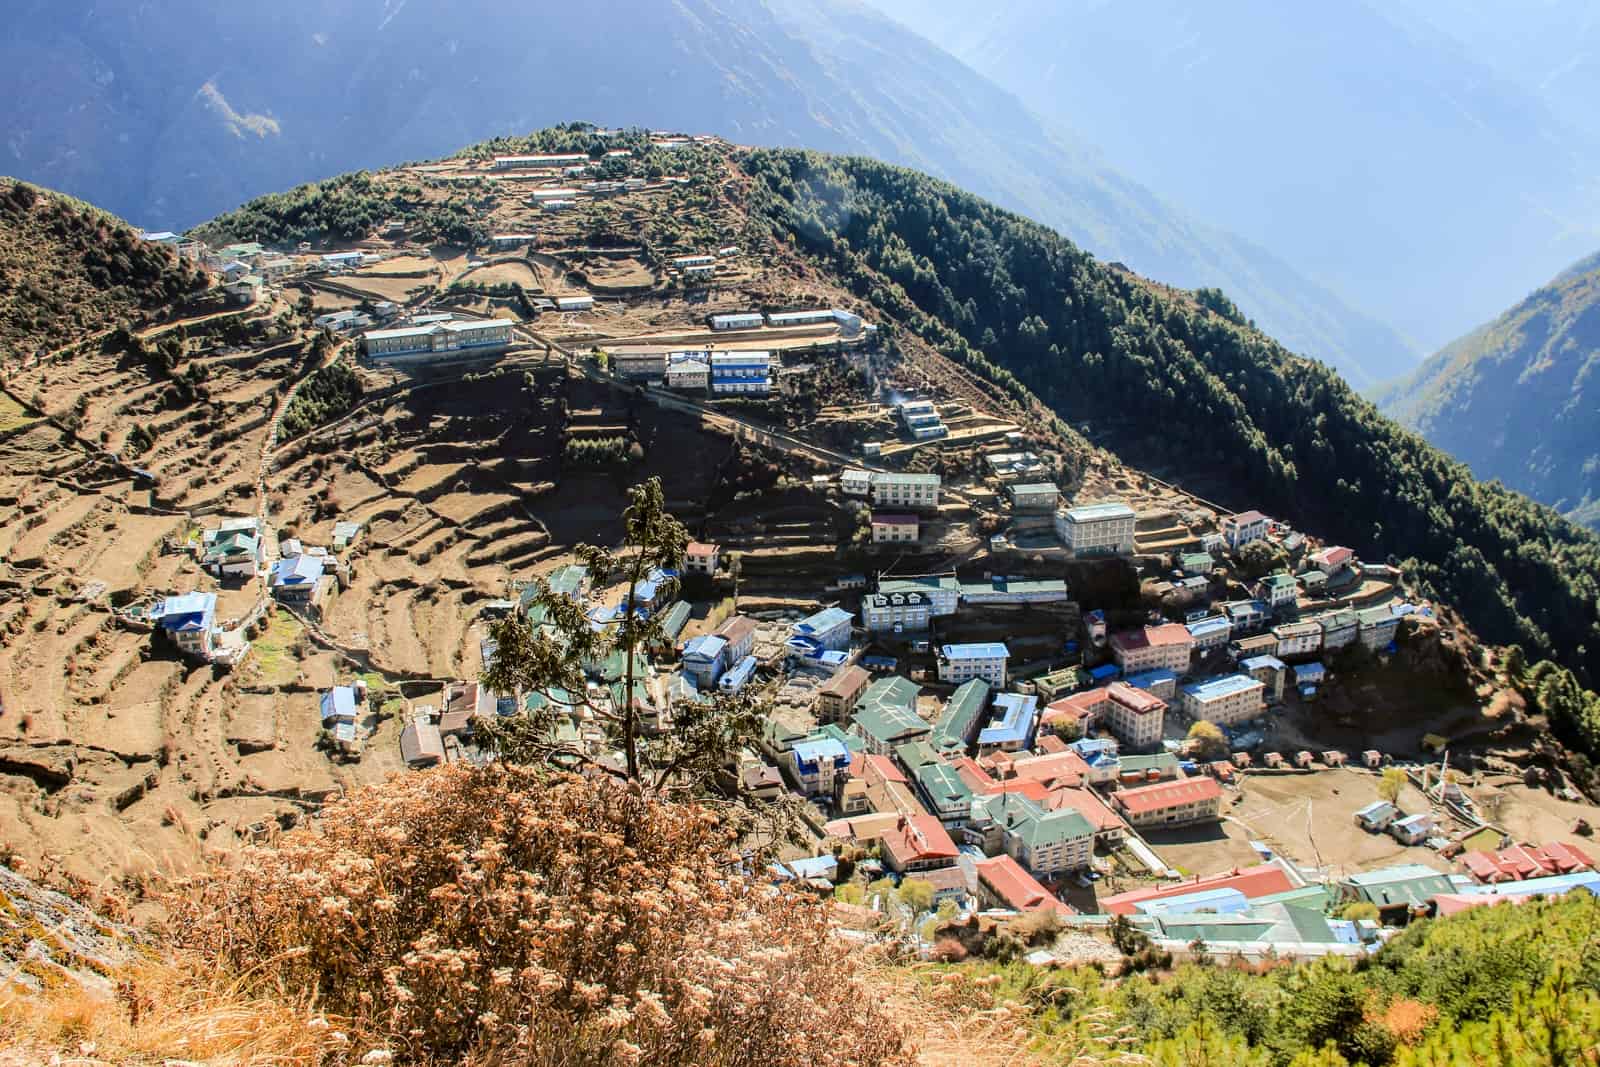 An elevated view of Namche Bazaar on the Everest Base Camp Trek - a collection of teahouses and small buildings nestled on a tiered landscape in a mountain valley